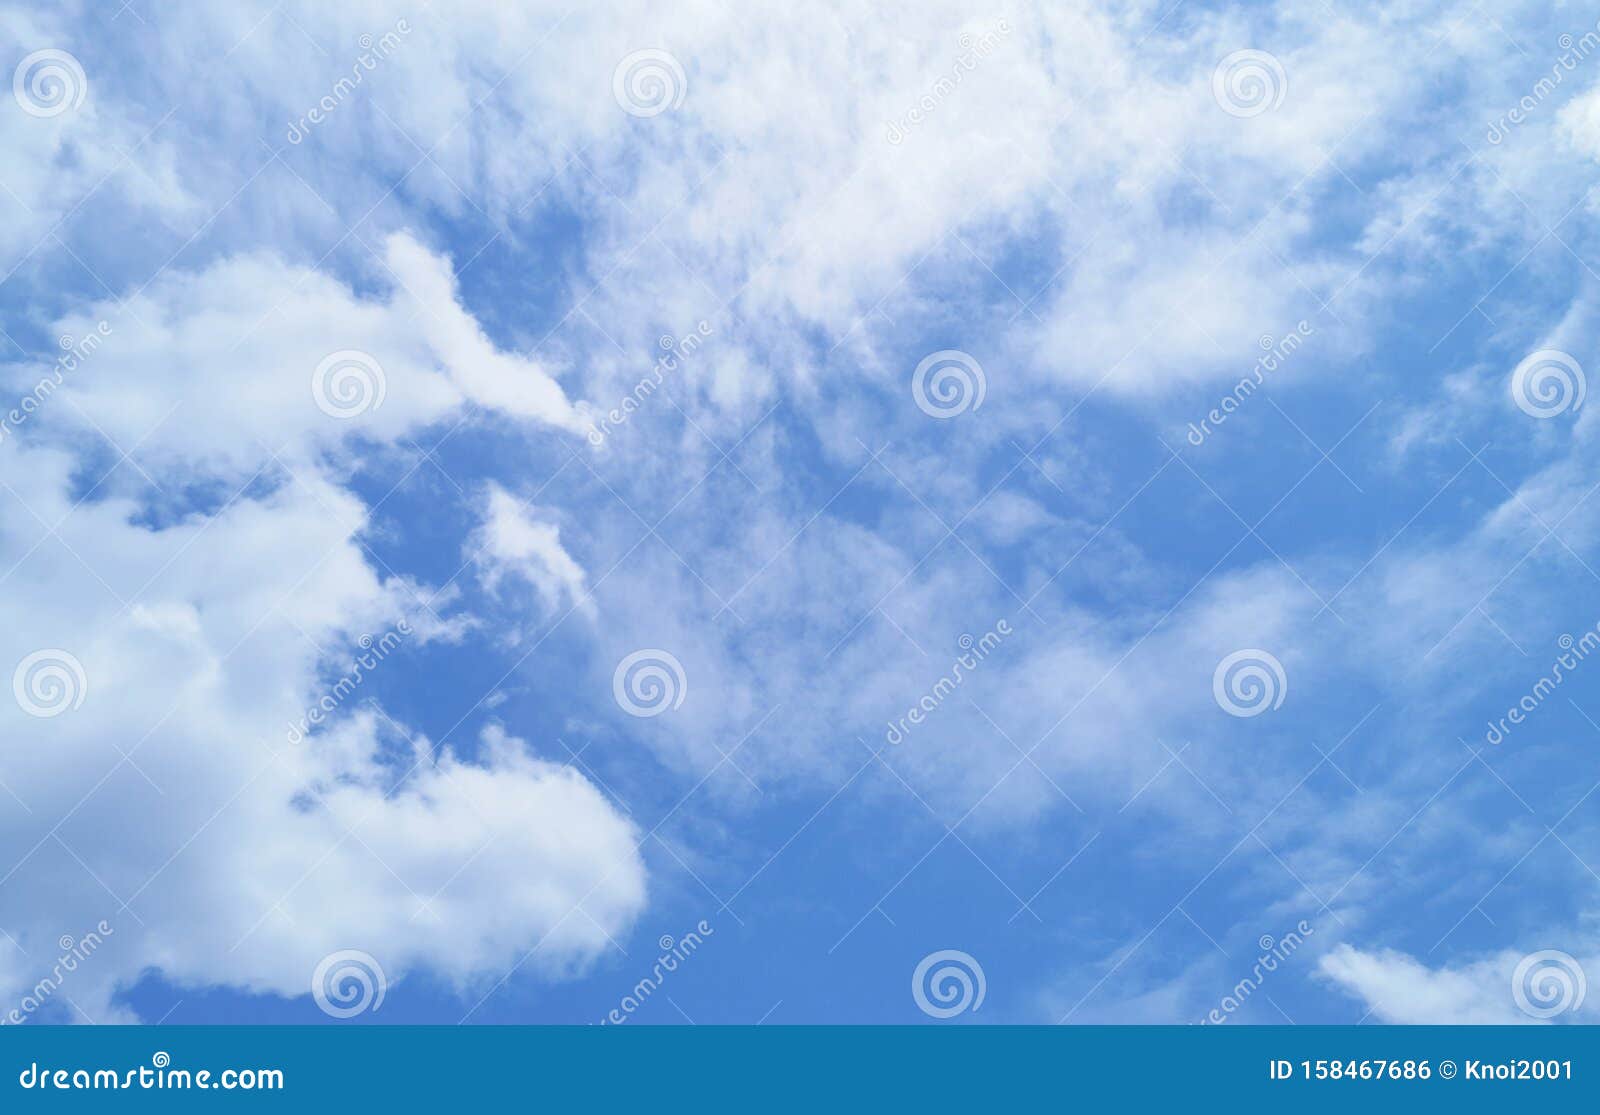 The View of the Beautiful Blue Sky with Clouds. Stock Photo - Image of ...